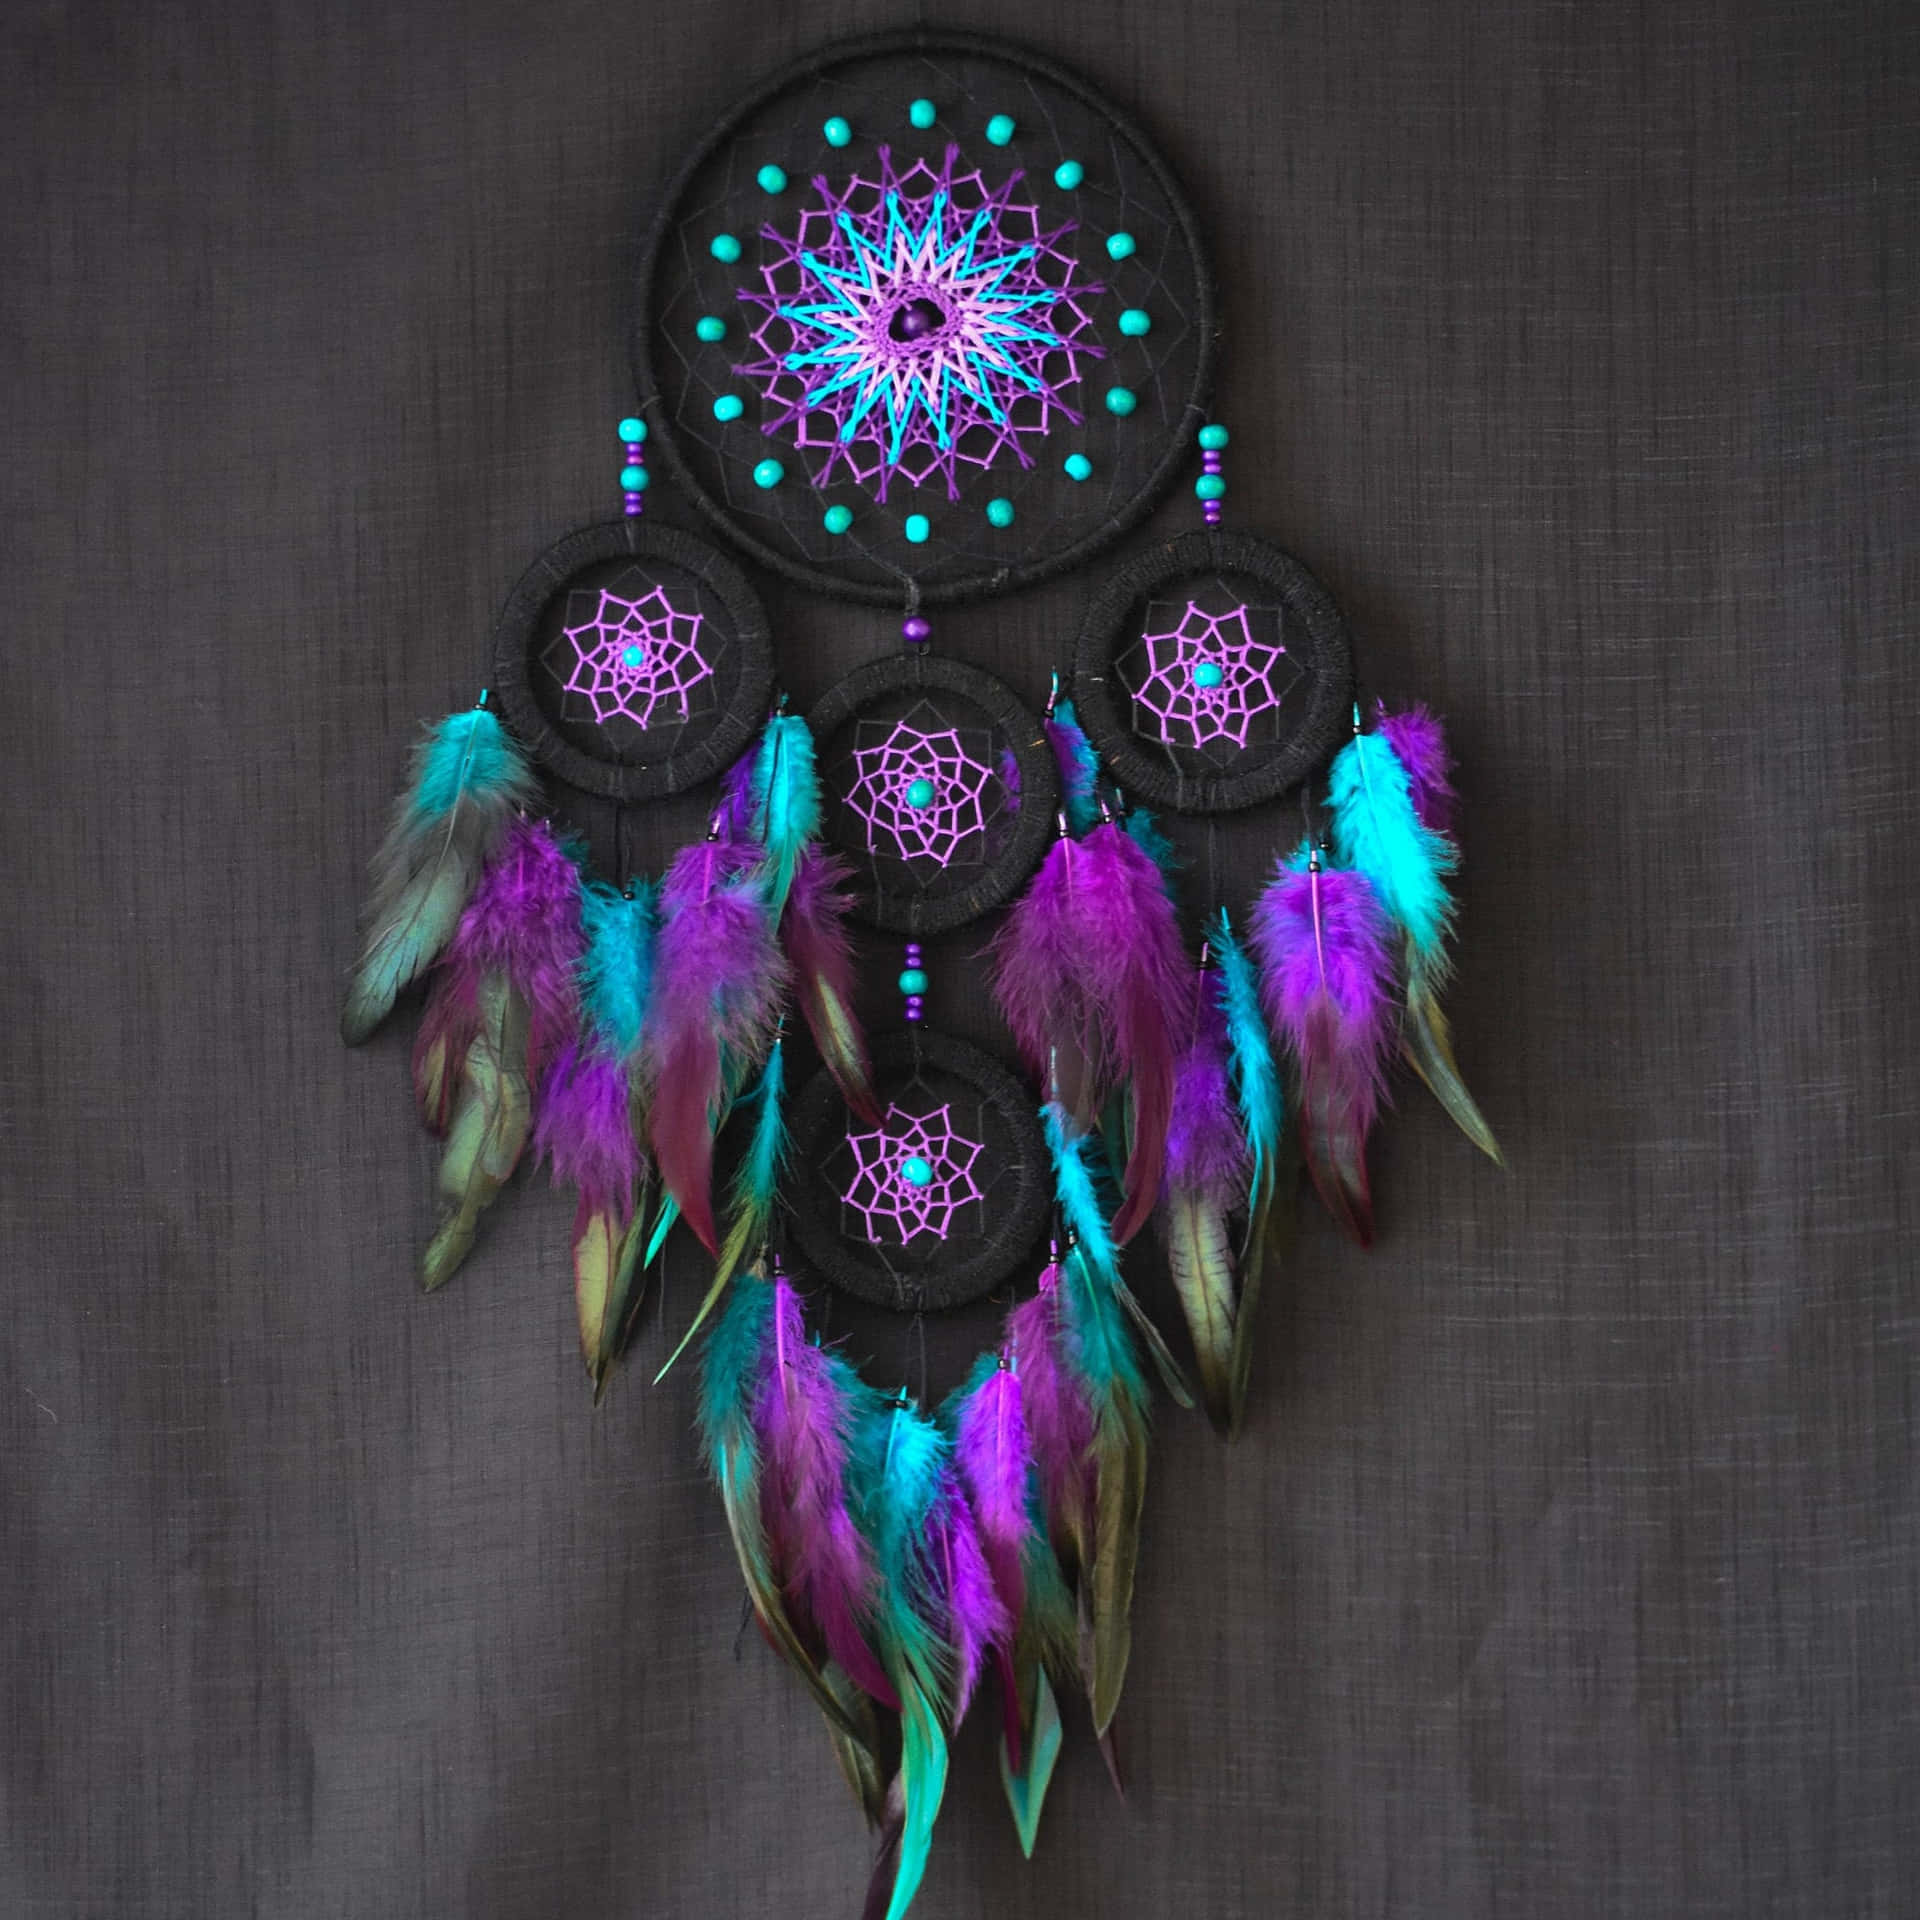 Hang your dreams high with a dream catcher